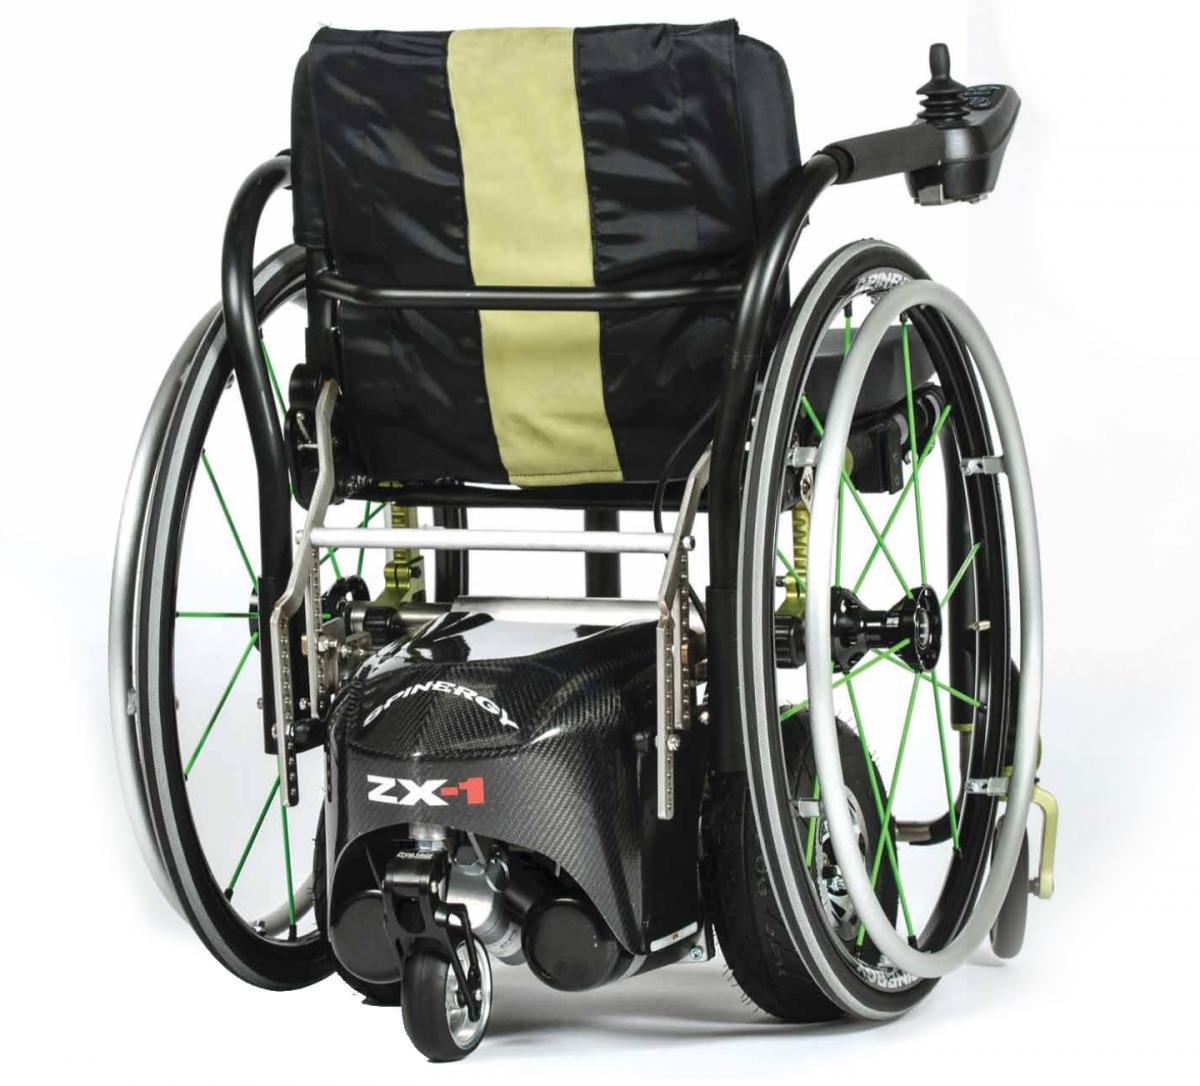 Spinergy ZX-1 Power Add-On for Manual Wheelchairs